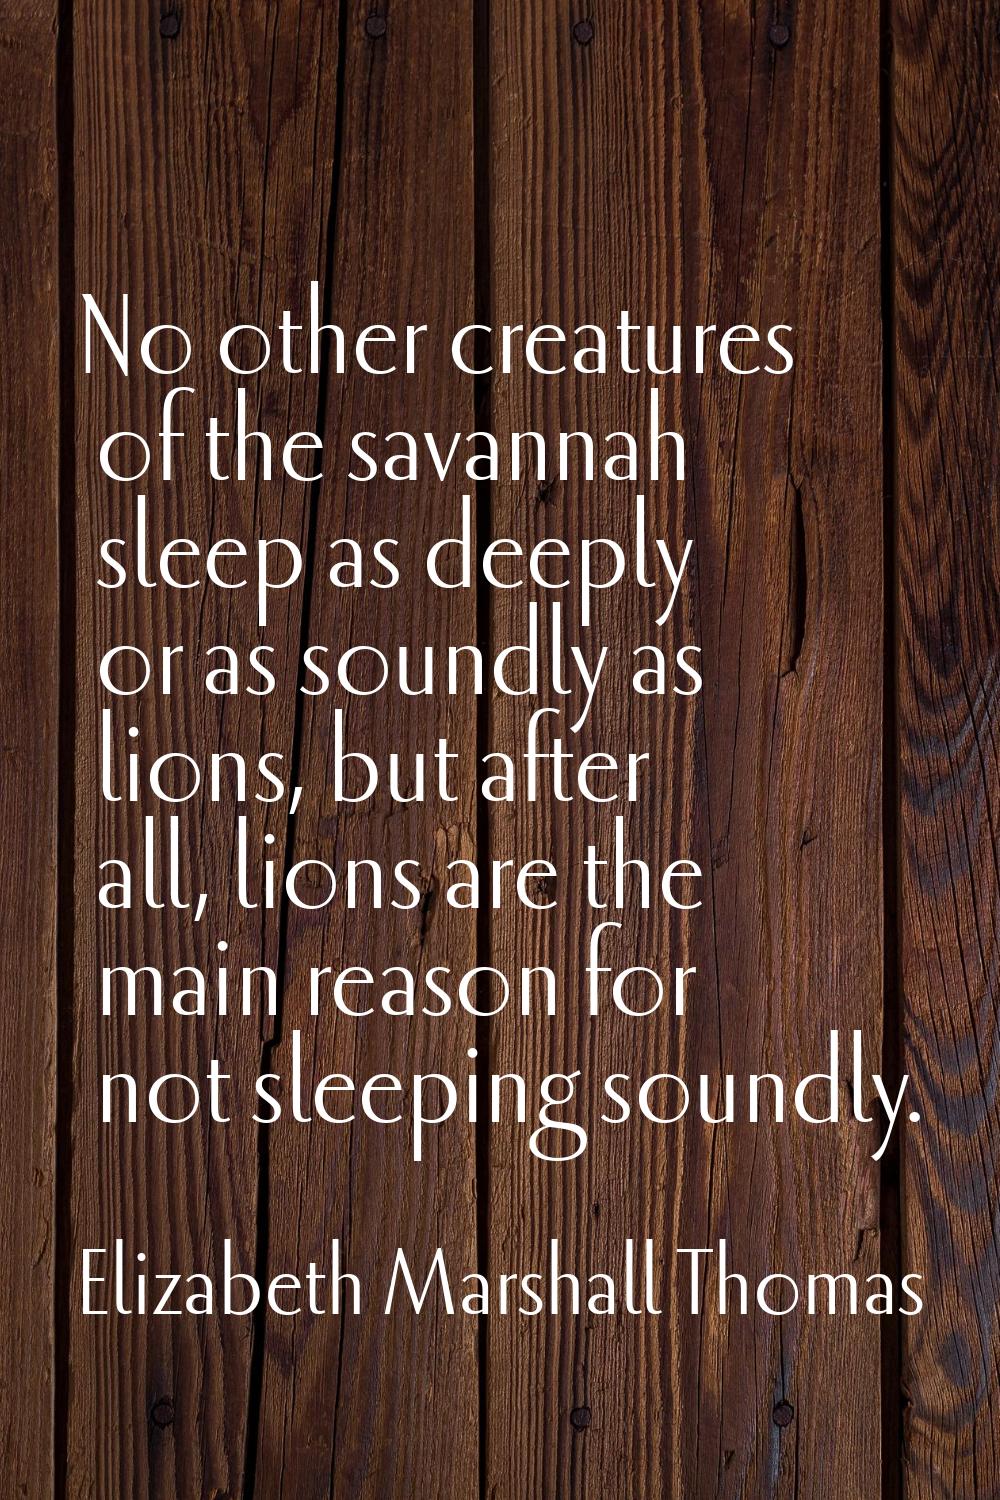 No other creatures of the savannah sleep as deeply or as soundly as lions, but after all, lions are